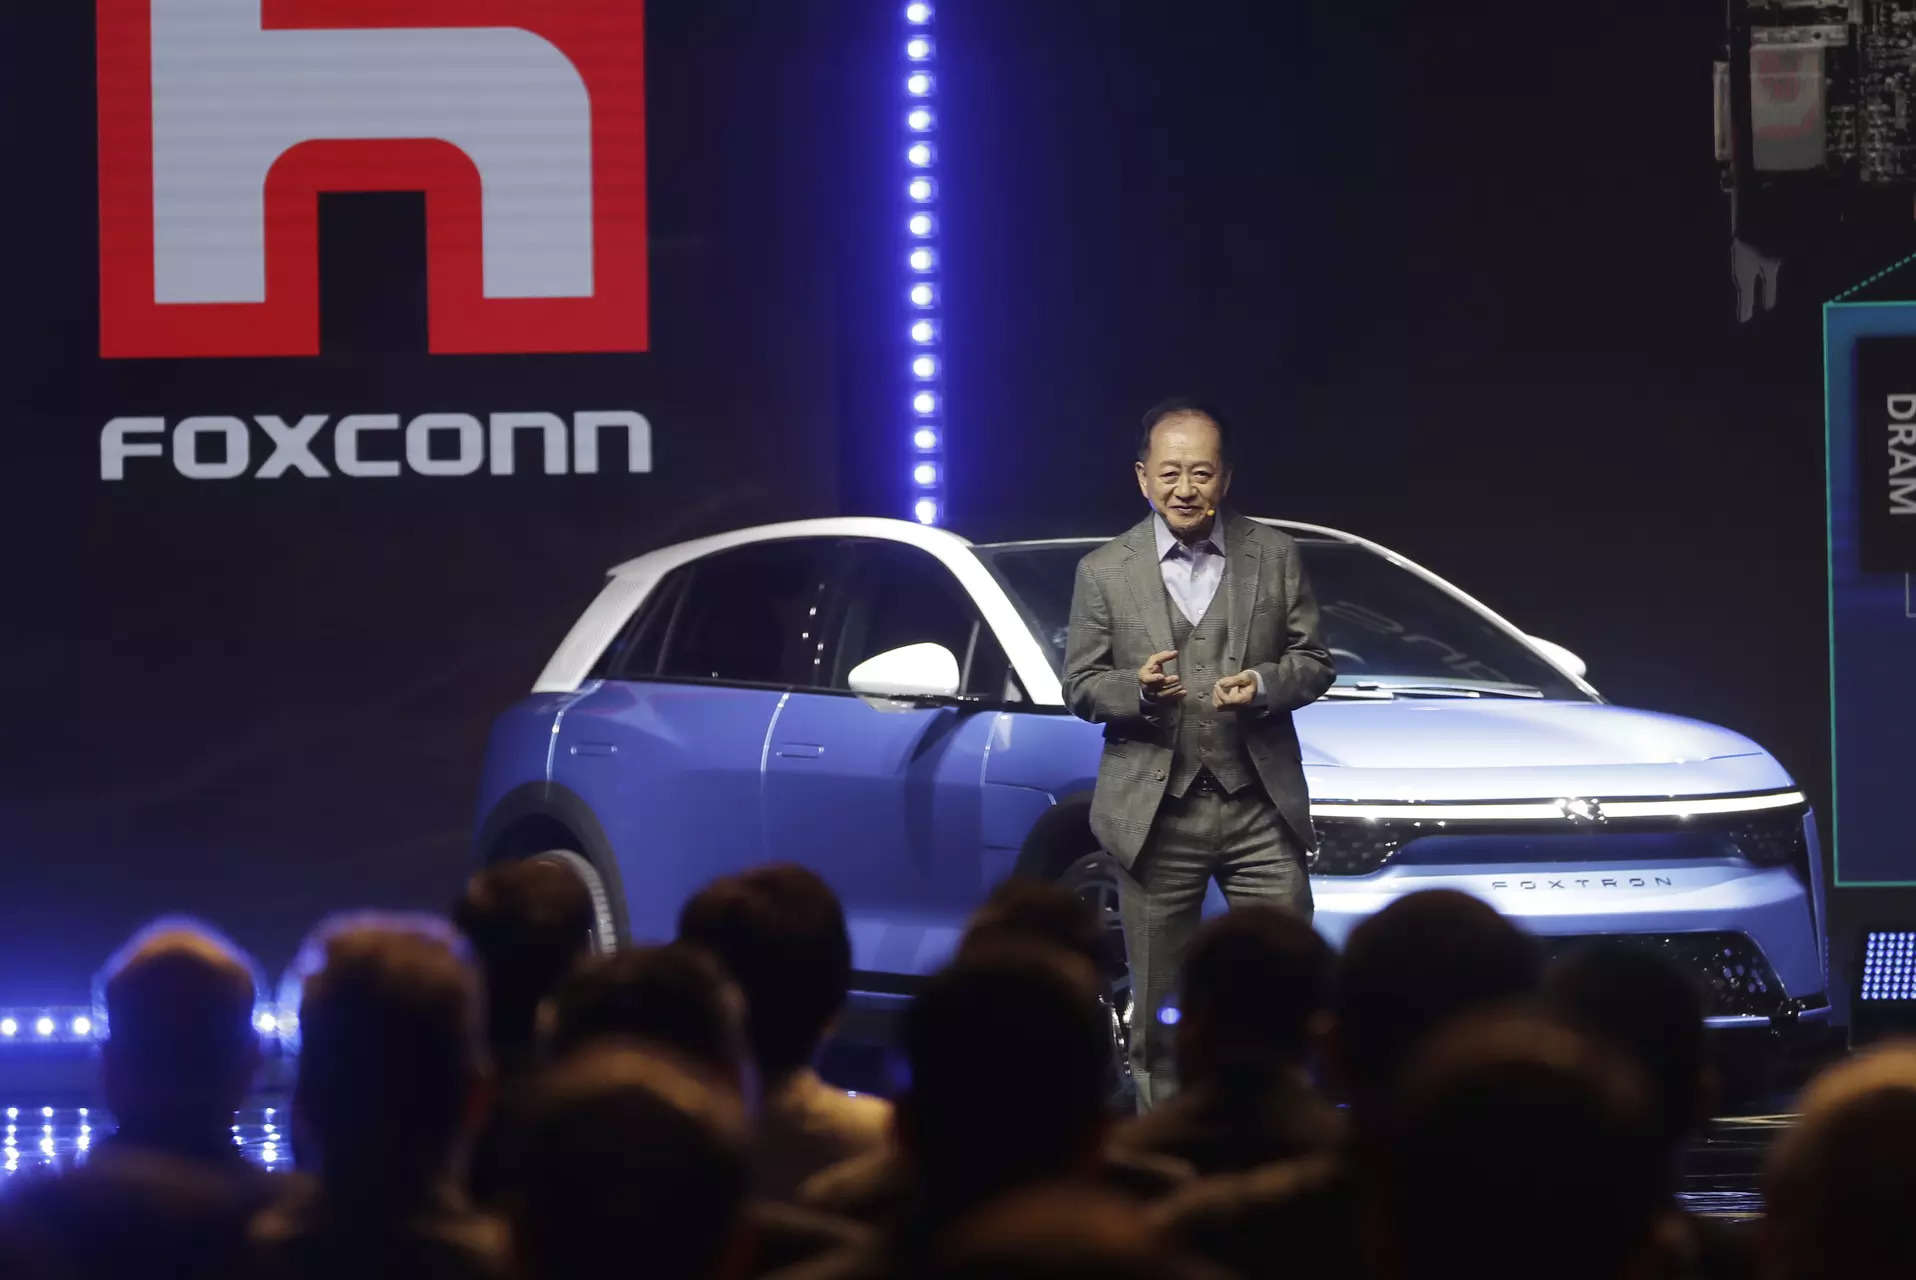 <p>Initially targeting 5% of the global EV market and the equivalent of USD 33 billion in revenue from manufacturing EVs and components by 2025, Foxconn's aggressive longer-term ambition is to make nearly half the world's EVs.</p>